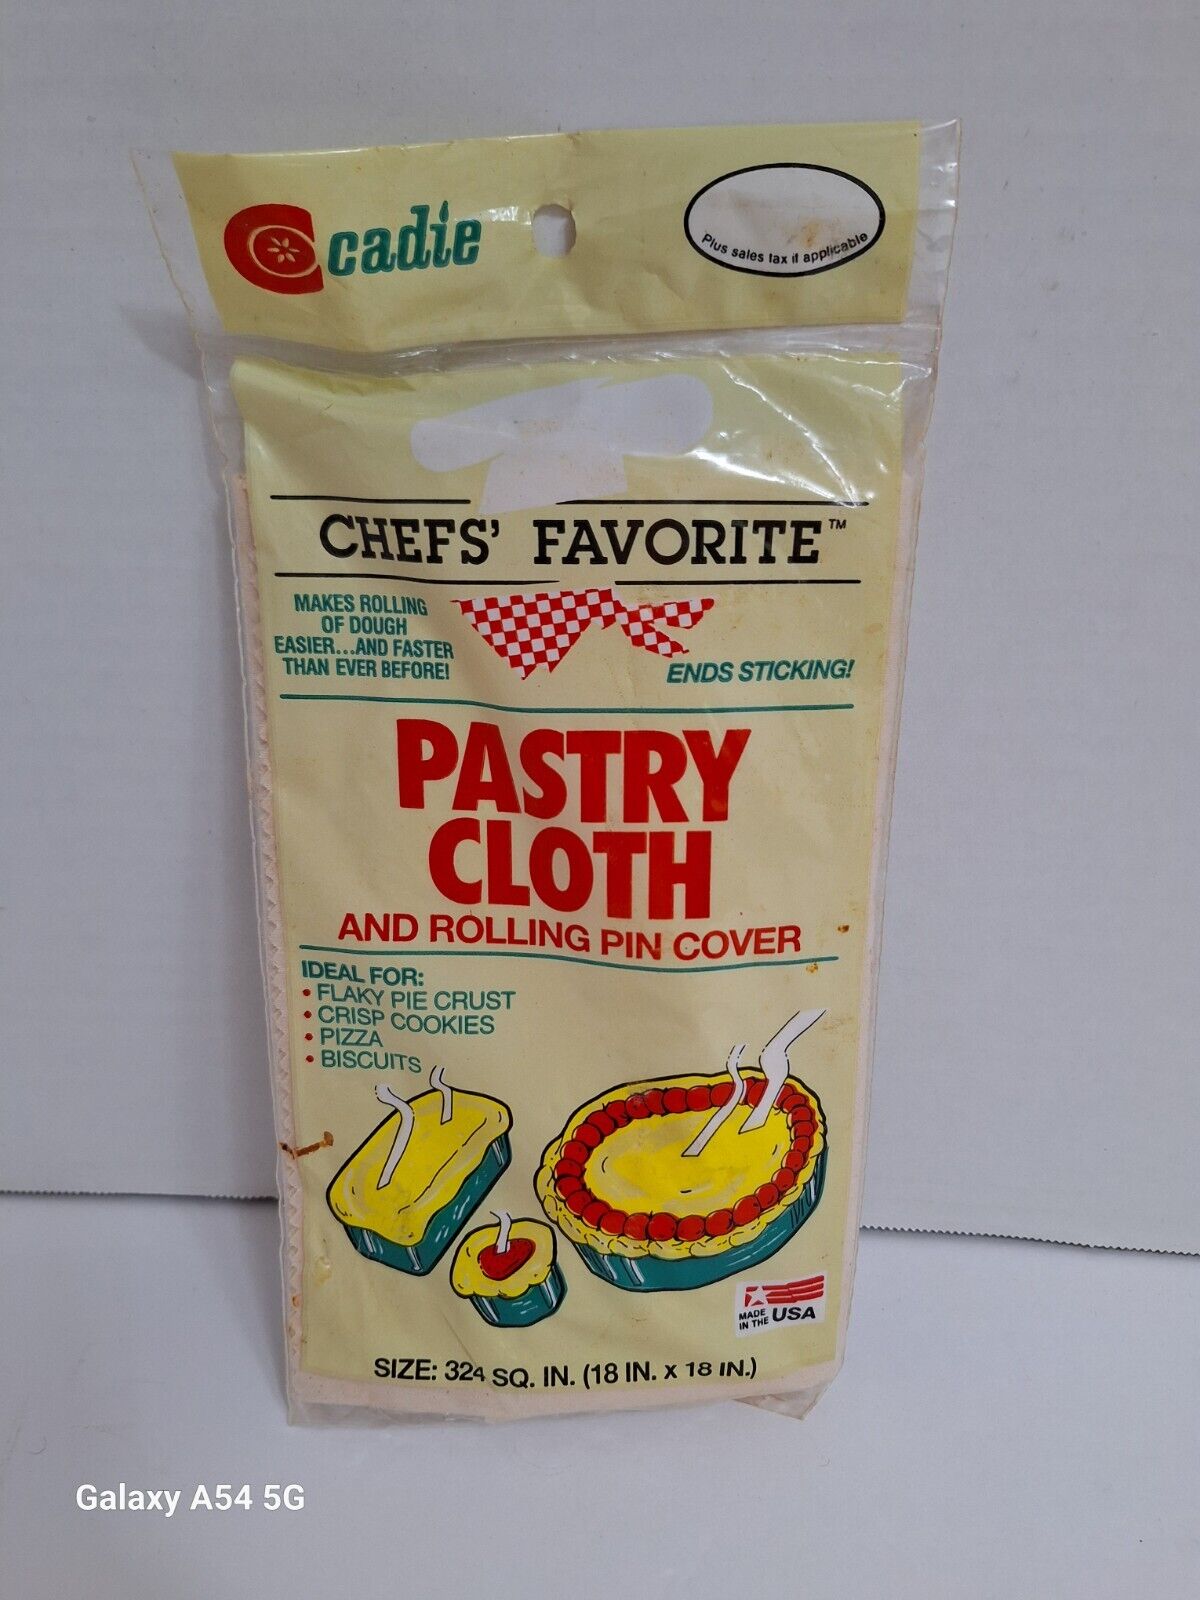 Vintage Kitchen Cadie Pastry Cloth & Rolling Pin Cover 324 Sq. In New Old Stock